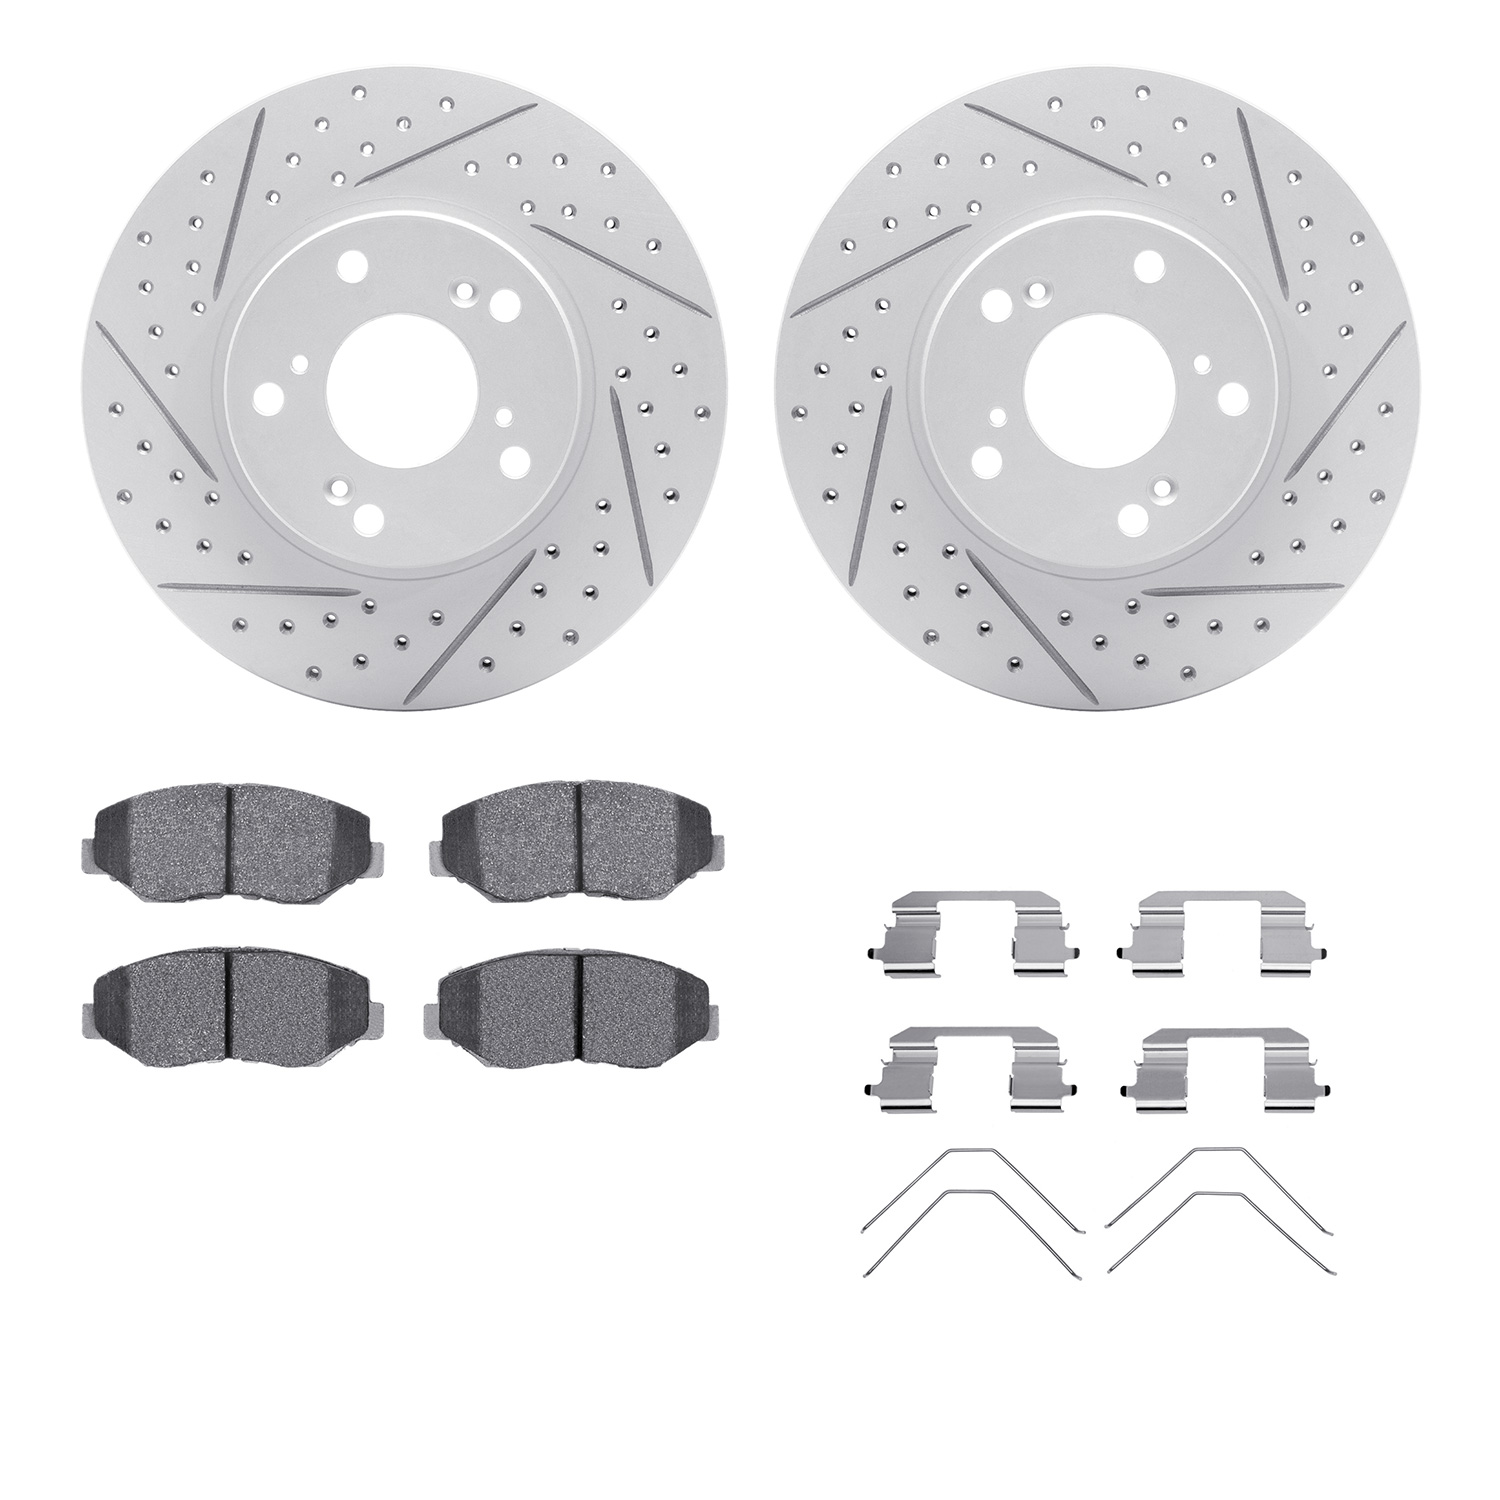 2512-59065 Geoperformance Drilled/Slotted Rotors w/5000 Advanced Brake Pads Kit & Hardware, 2002-2015 Acura/Honda, Position: Fro